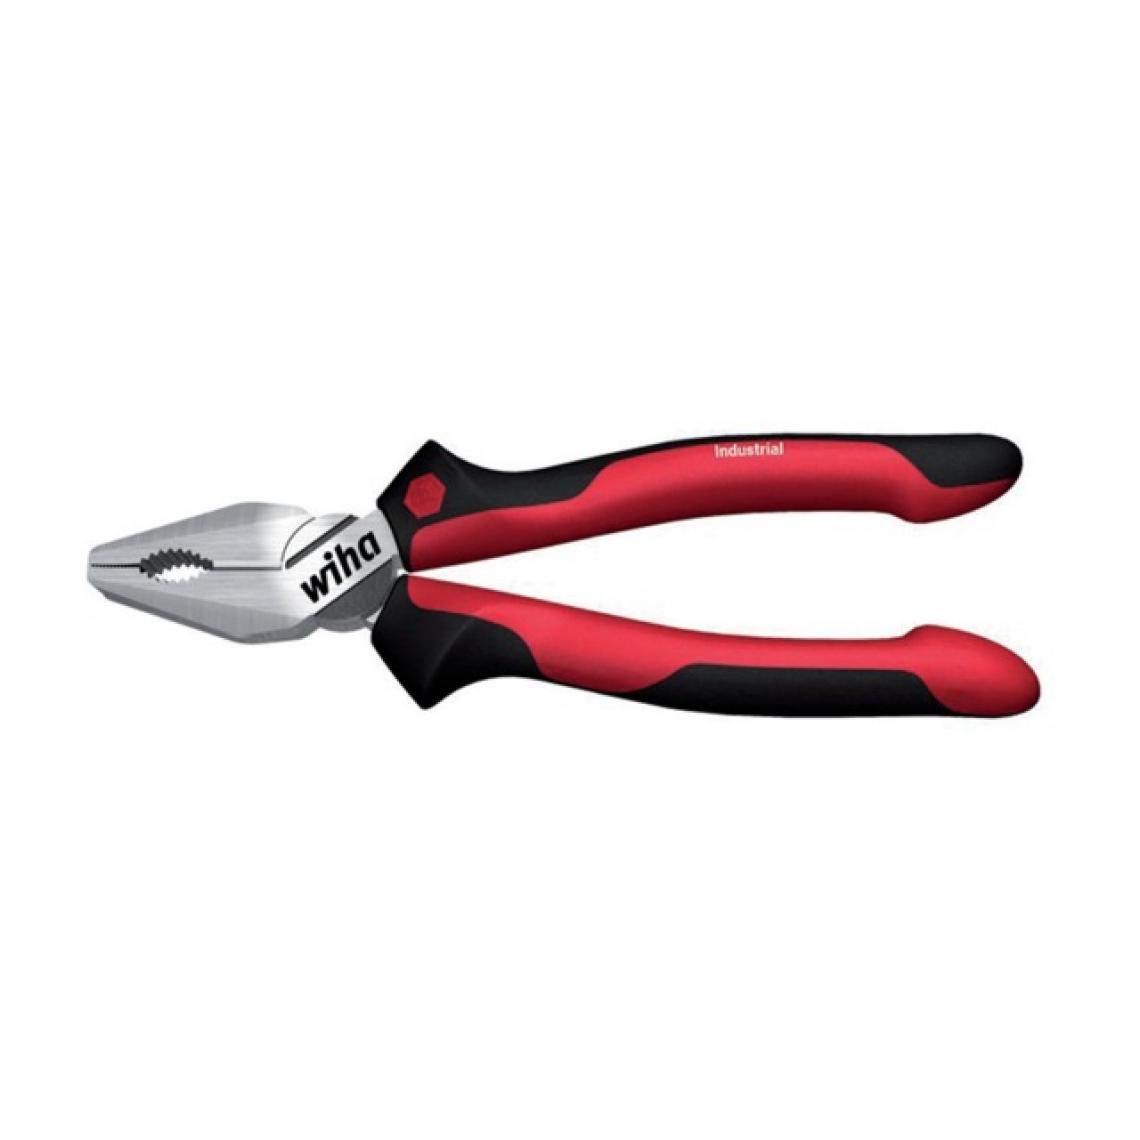 Wiha - Pince universelle Industrial Pro WIHA 180 mm - 30826 - Outils de coupe